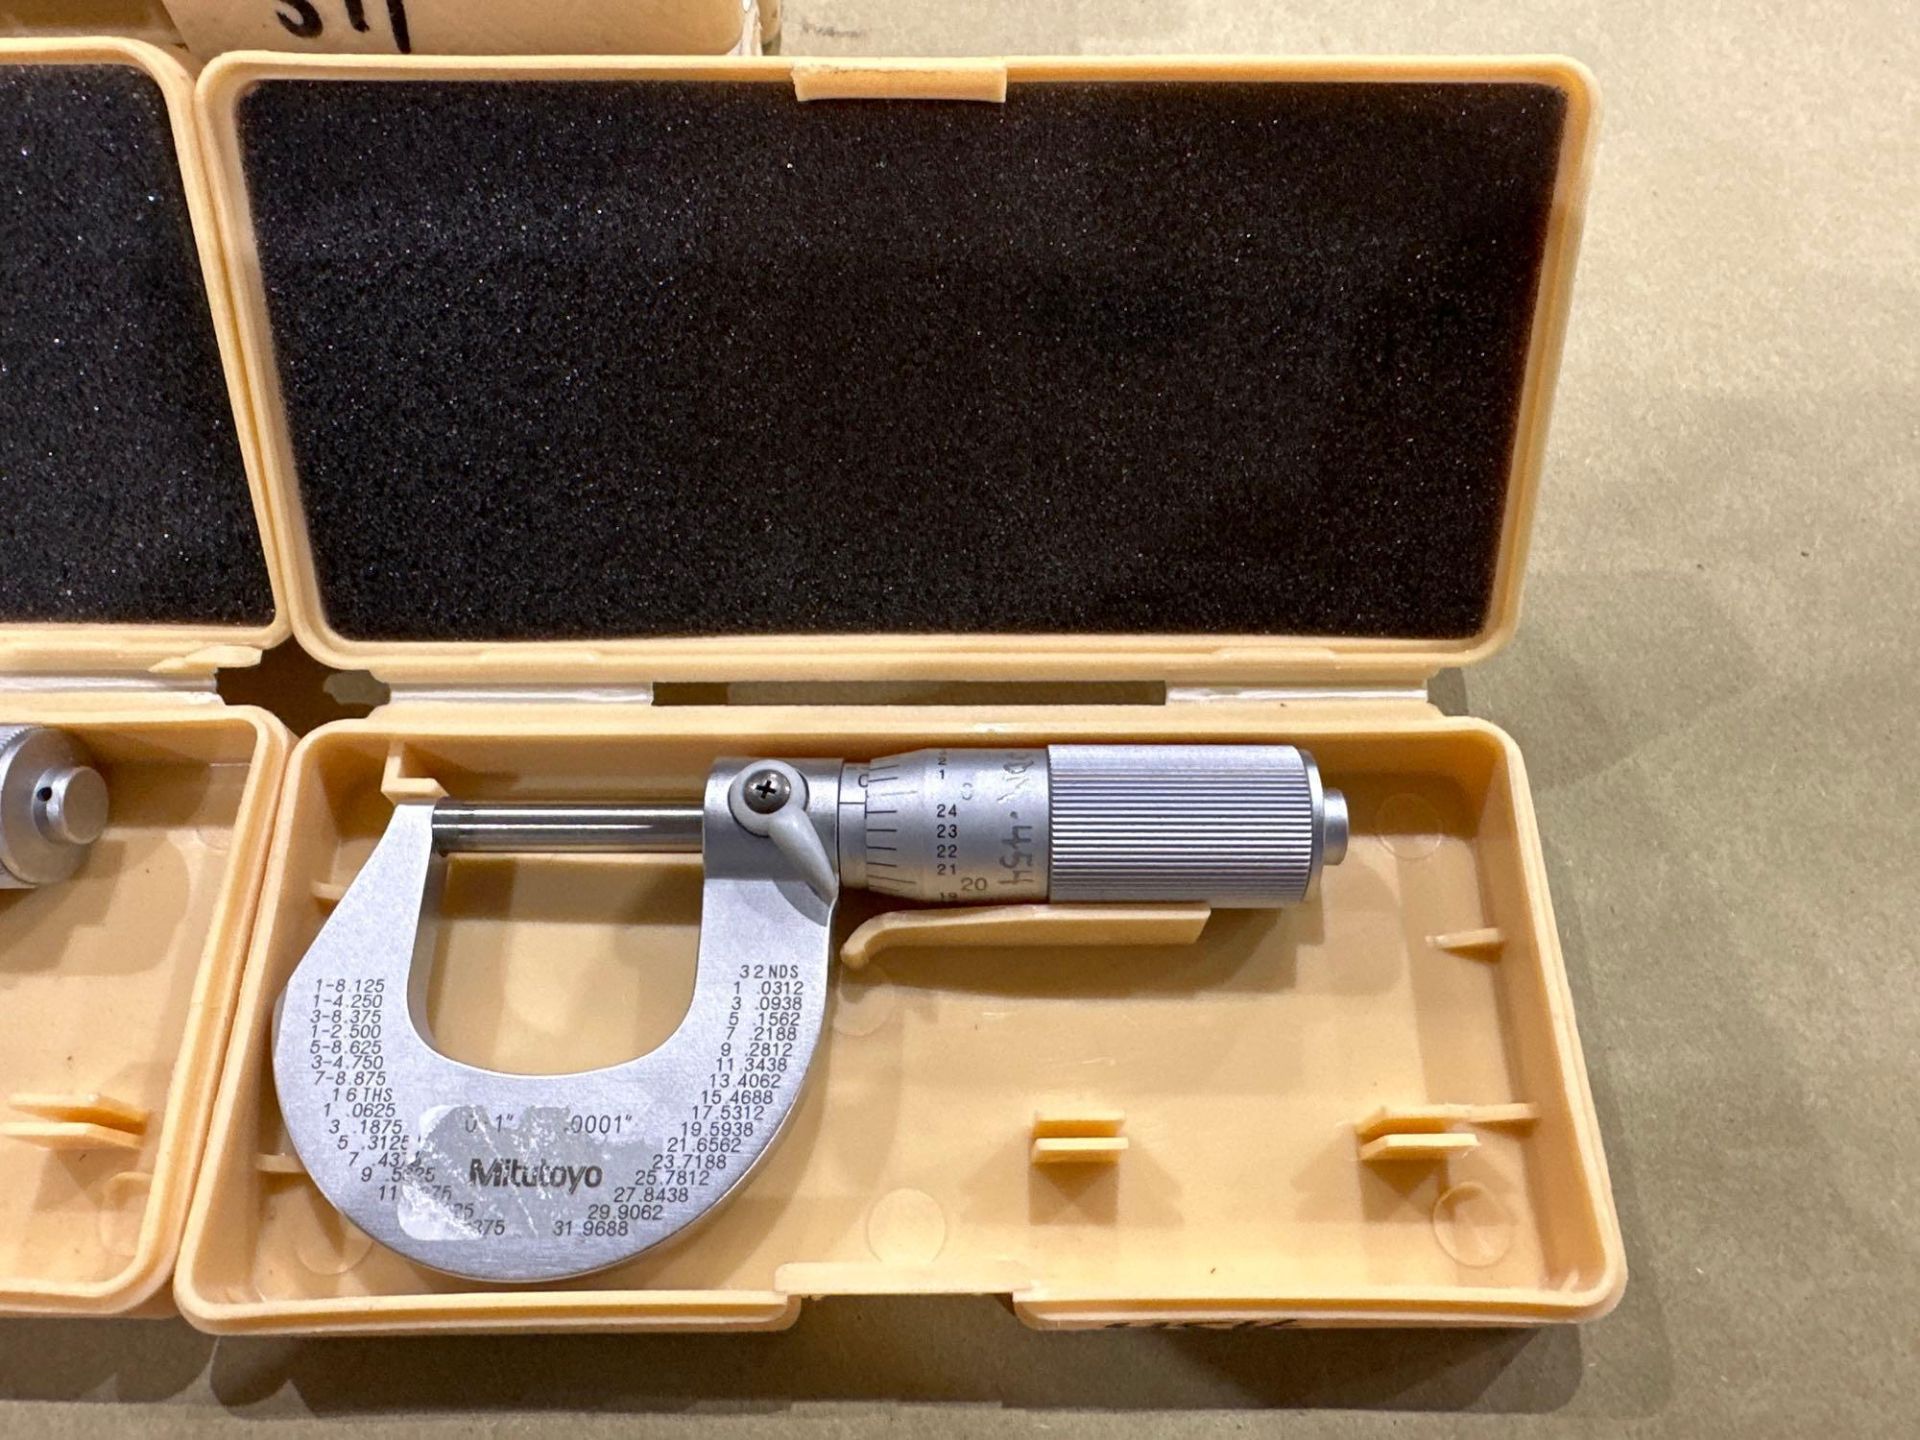 Lot of 12: Mitutoyo Mechanical OD Micrometer M225-1”, 0-1” Range, .0001” Graduation in plastic boxes - Image 4 of 5